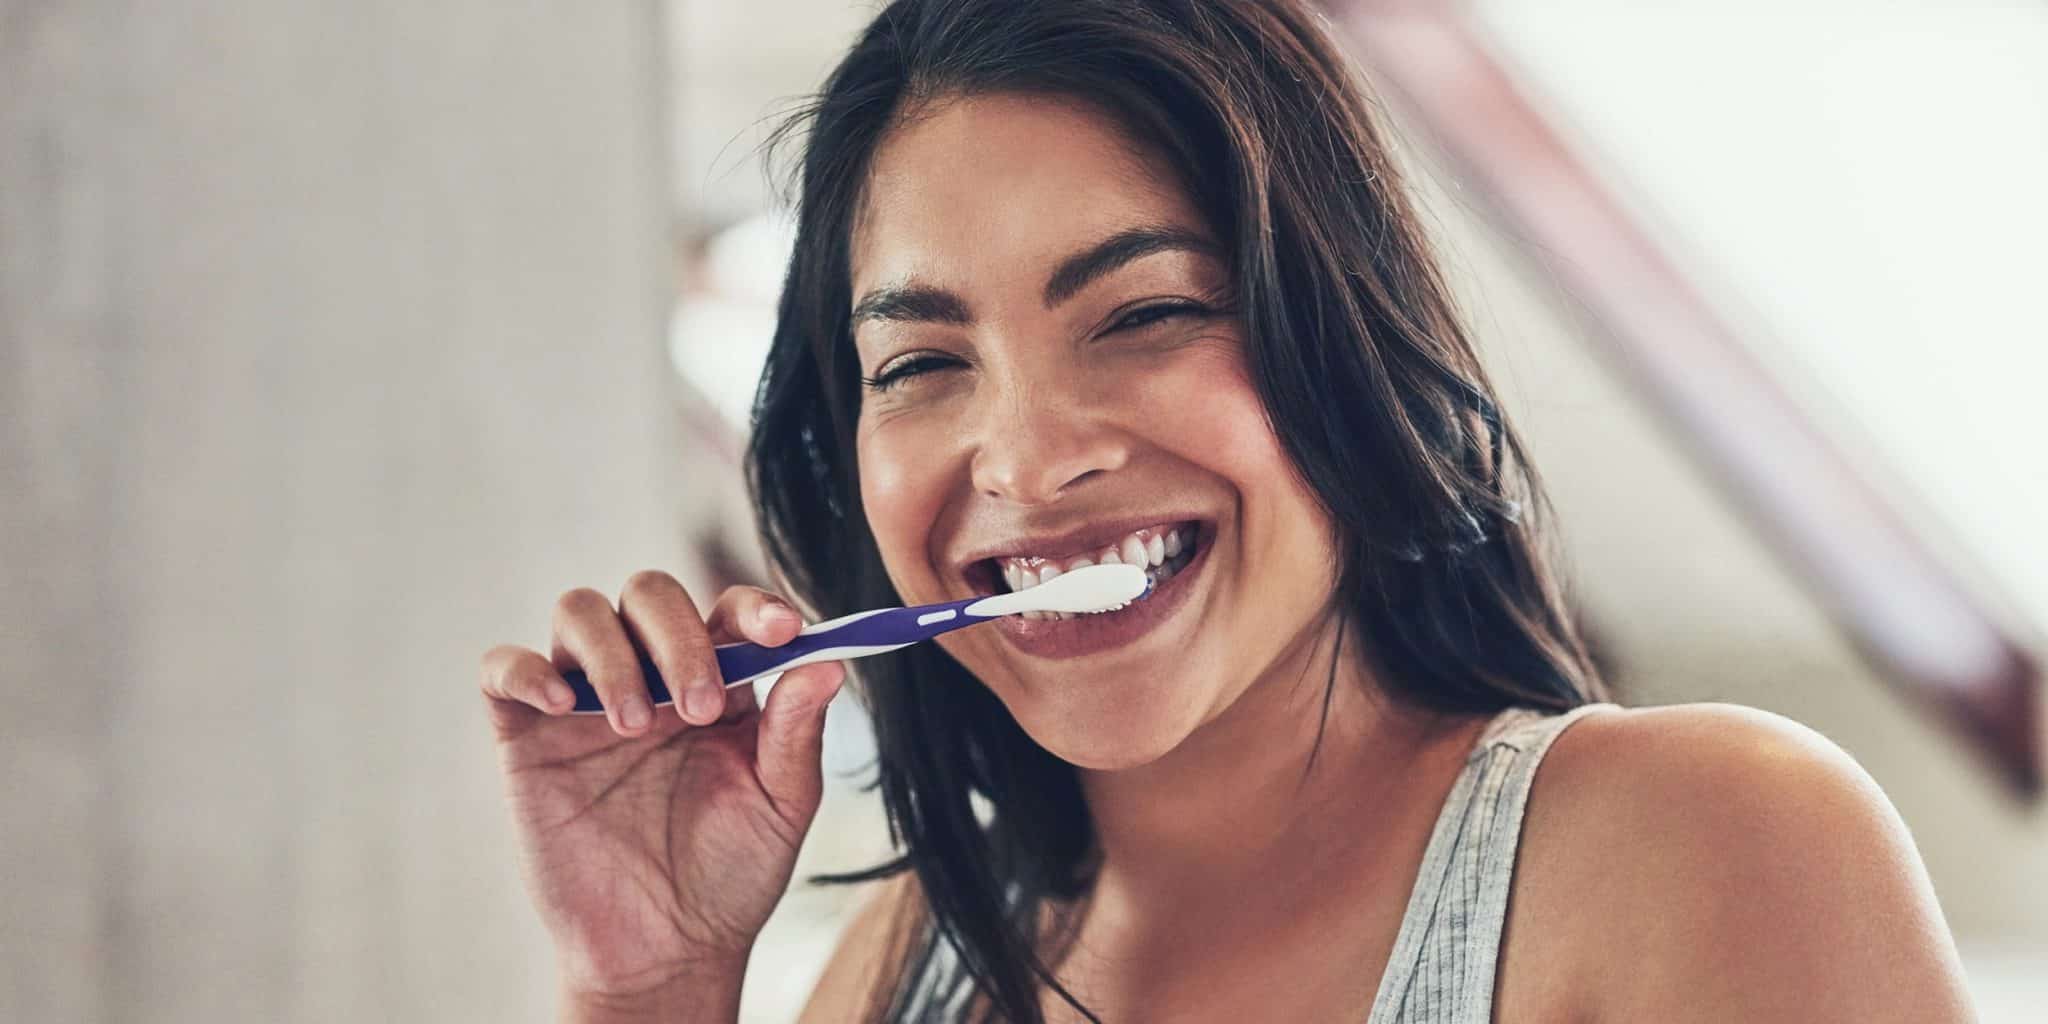 A person brushing their teeth with charcoal paste, trying the latest teeth whitening trend.